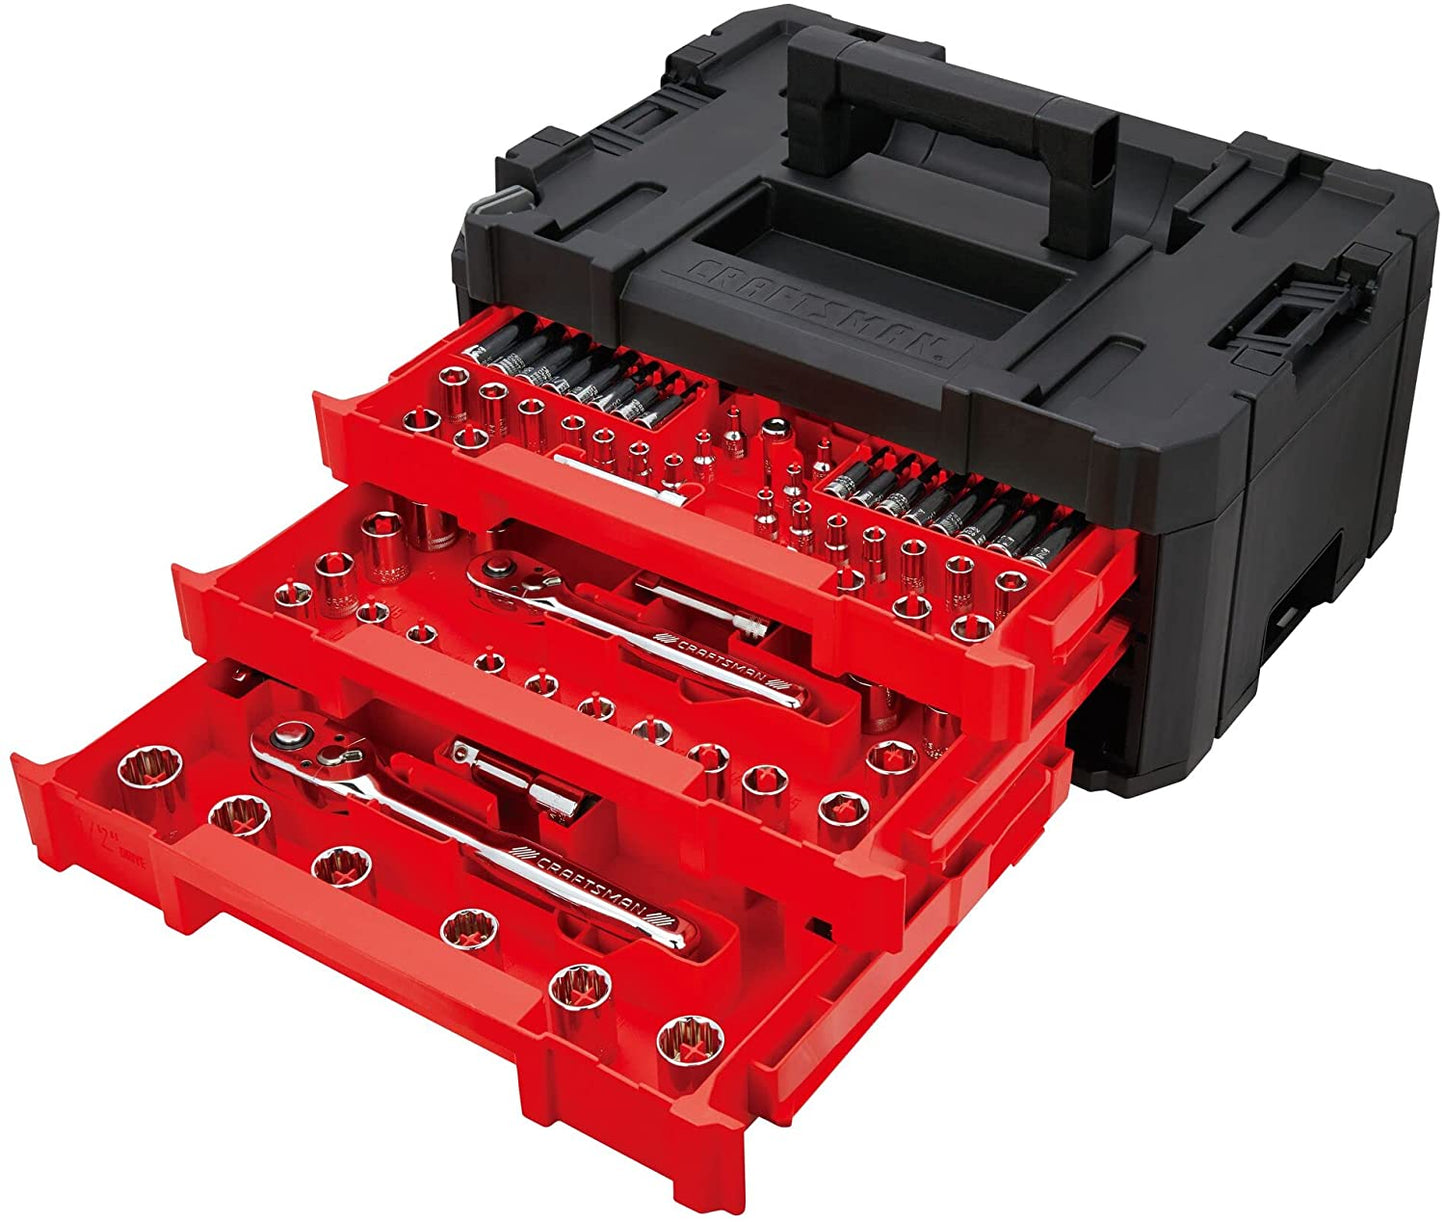 Mechanic Tool Set, 230 Piece with 3 Drawers, Sockets, Extension Bars, Wrenches, Hex Keys, and More (CMMT45305)